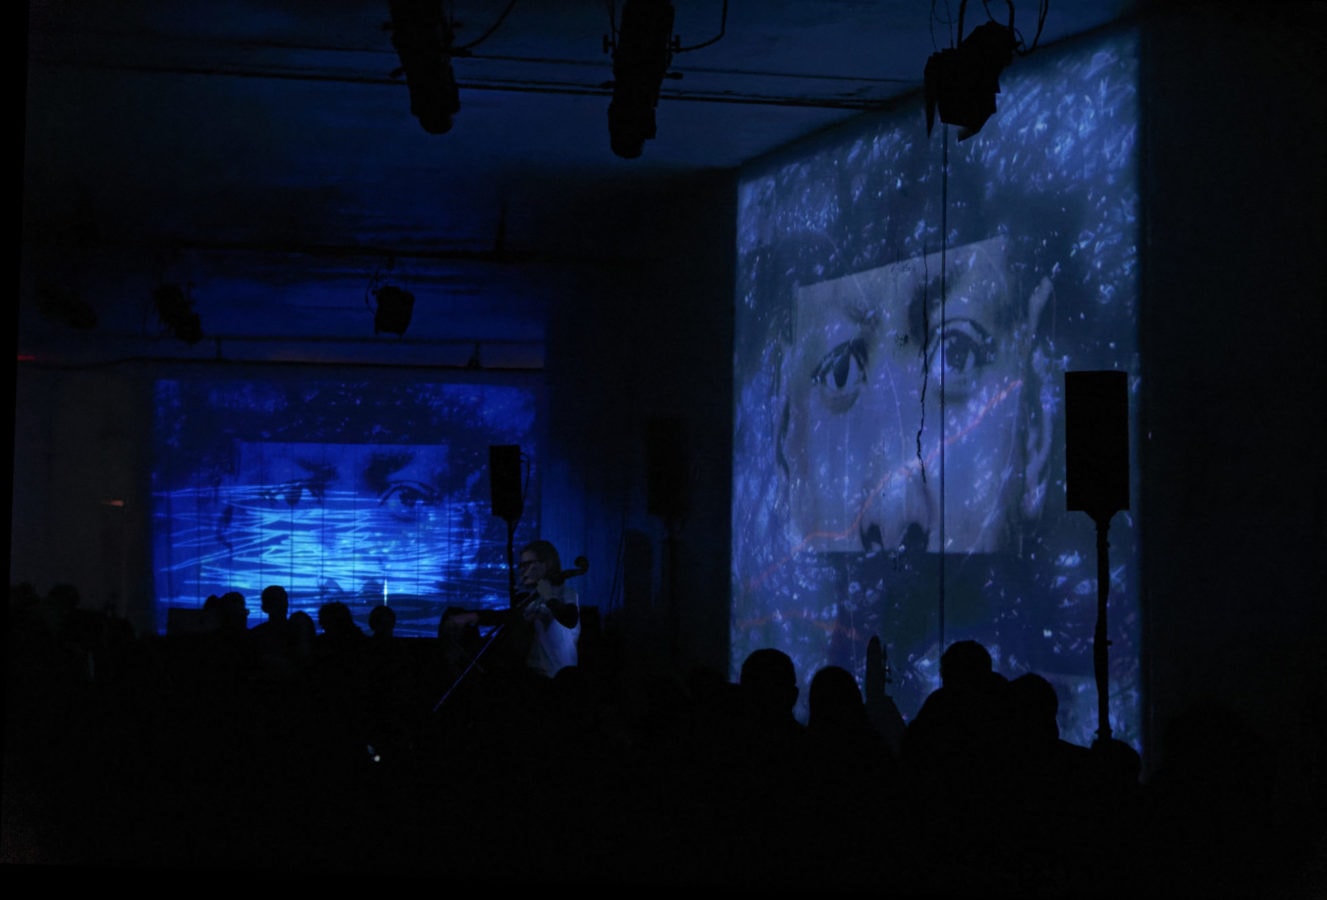  Amanda Gookin's Forward Music Project at the Direct Current Festival on March 29. Photo by Anu Dev. Projections by S. Katy Tucker.